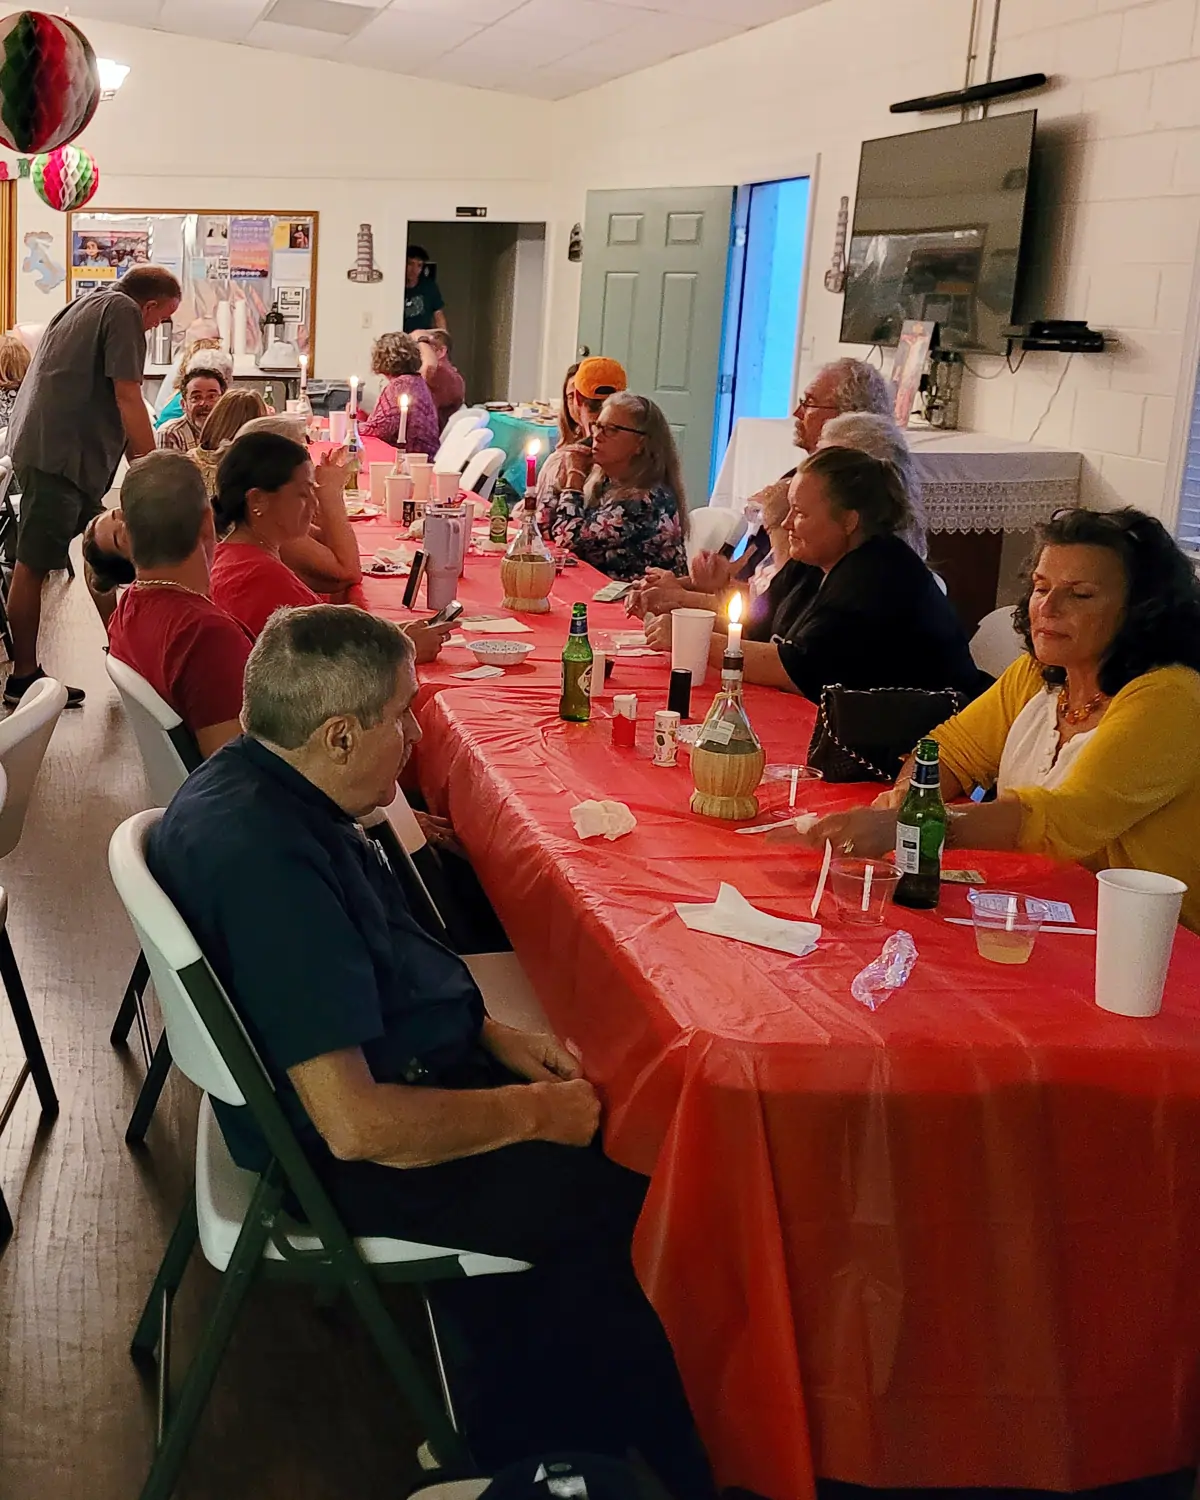 Dining on pasta at the 12th Spaghetti Dinner